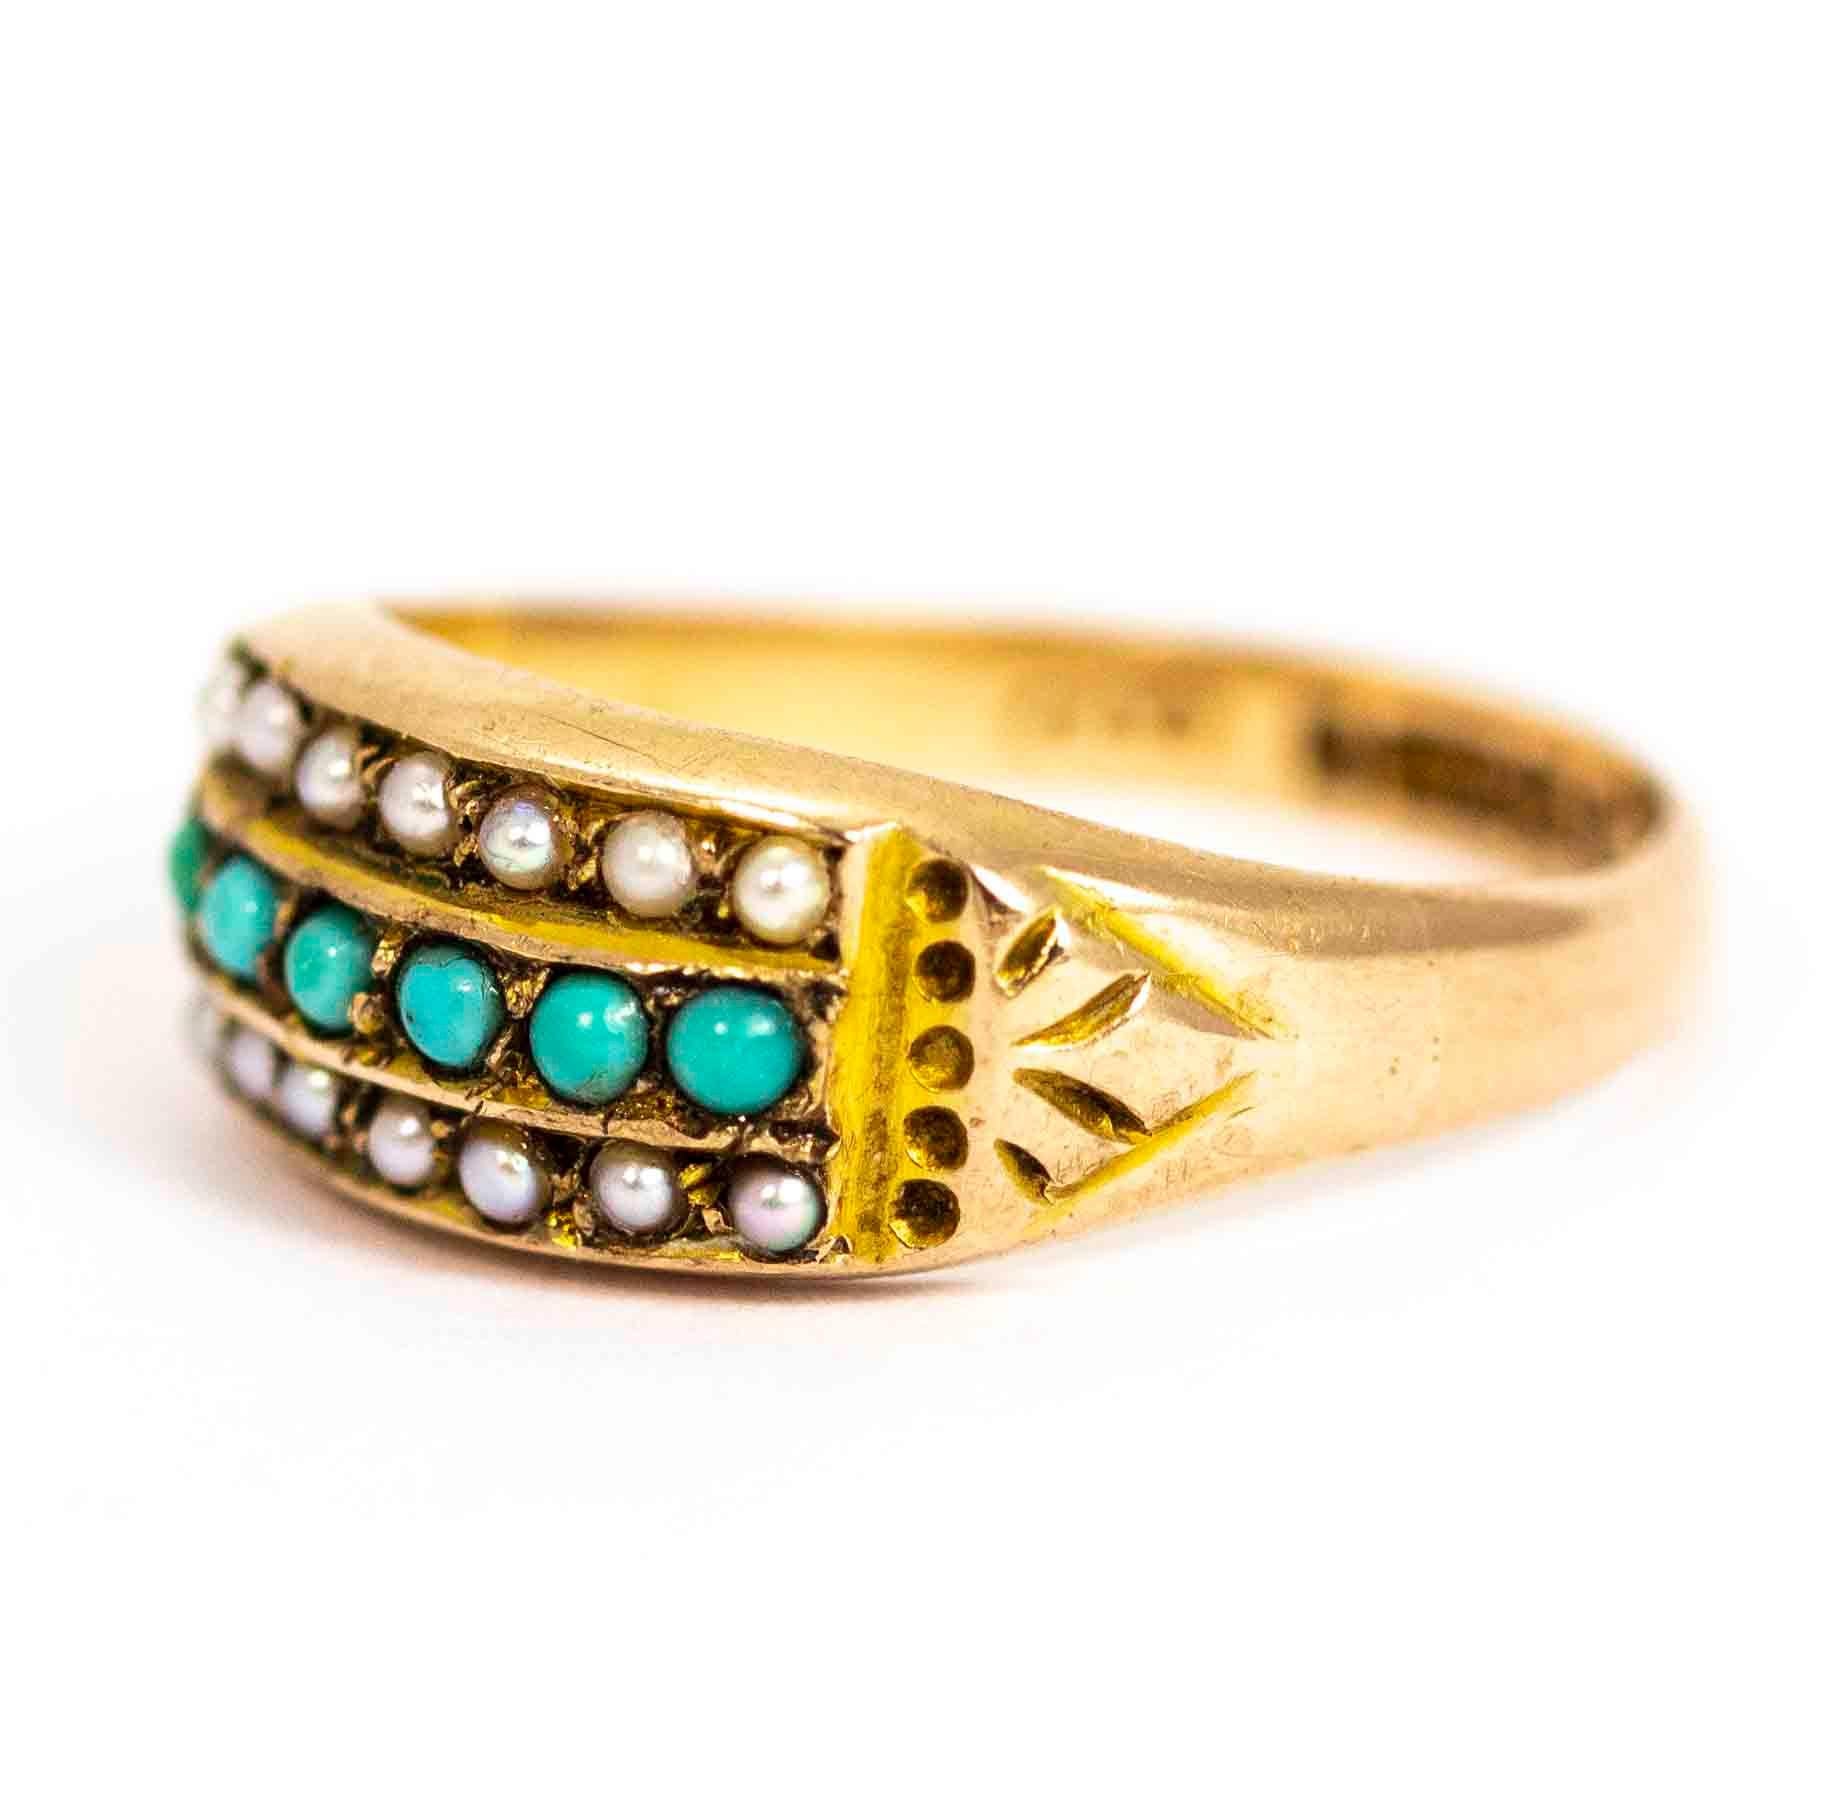 A wonderful antique Victorian ring set with three bands of stunning stones. A band of six beautiful turquoise cabochons is set between two bands of seven seed pearls. The shoulders are set with great hand-chased detailing. The inscription on the